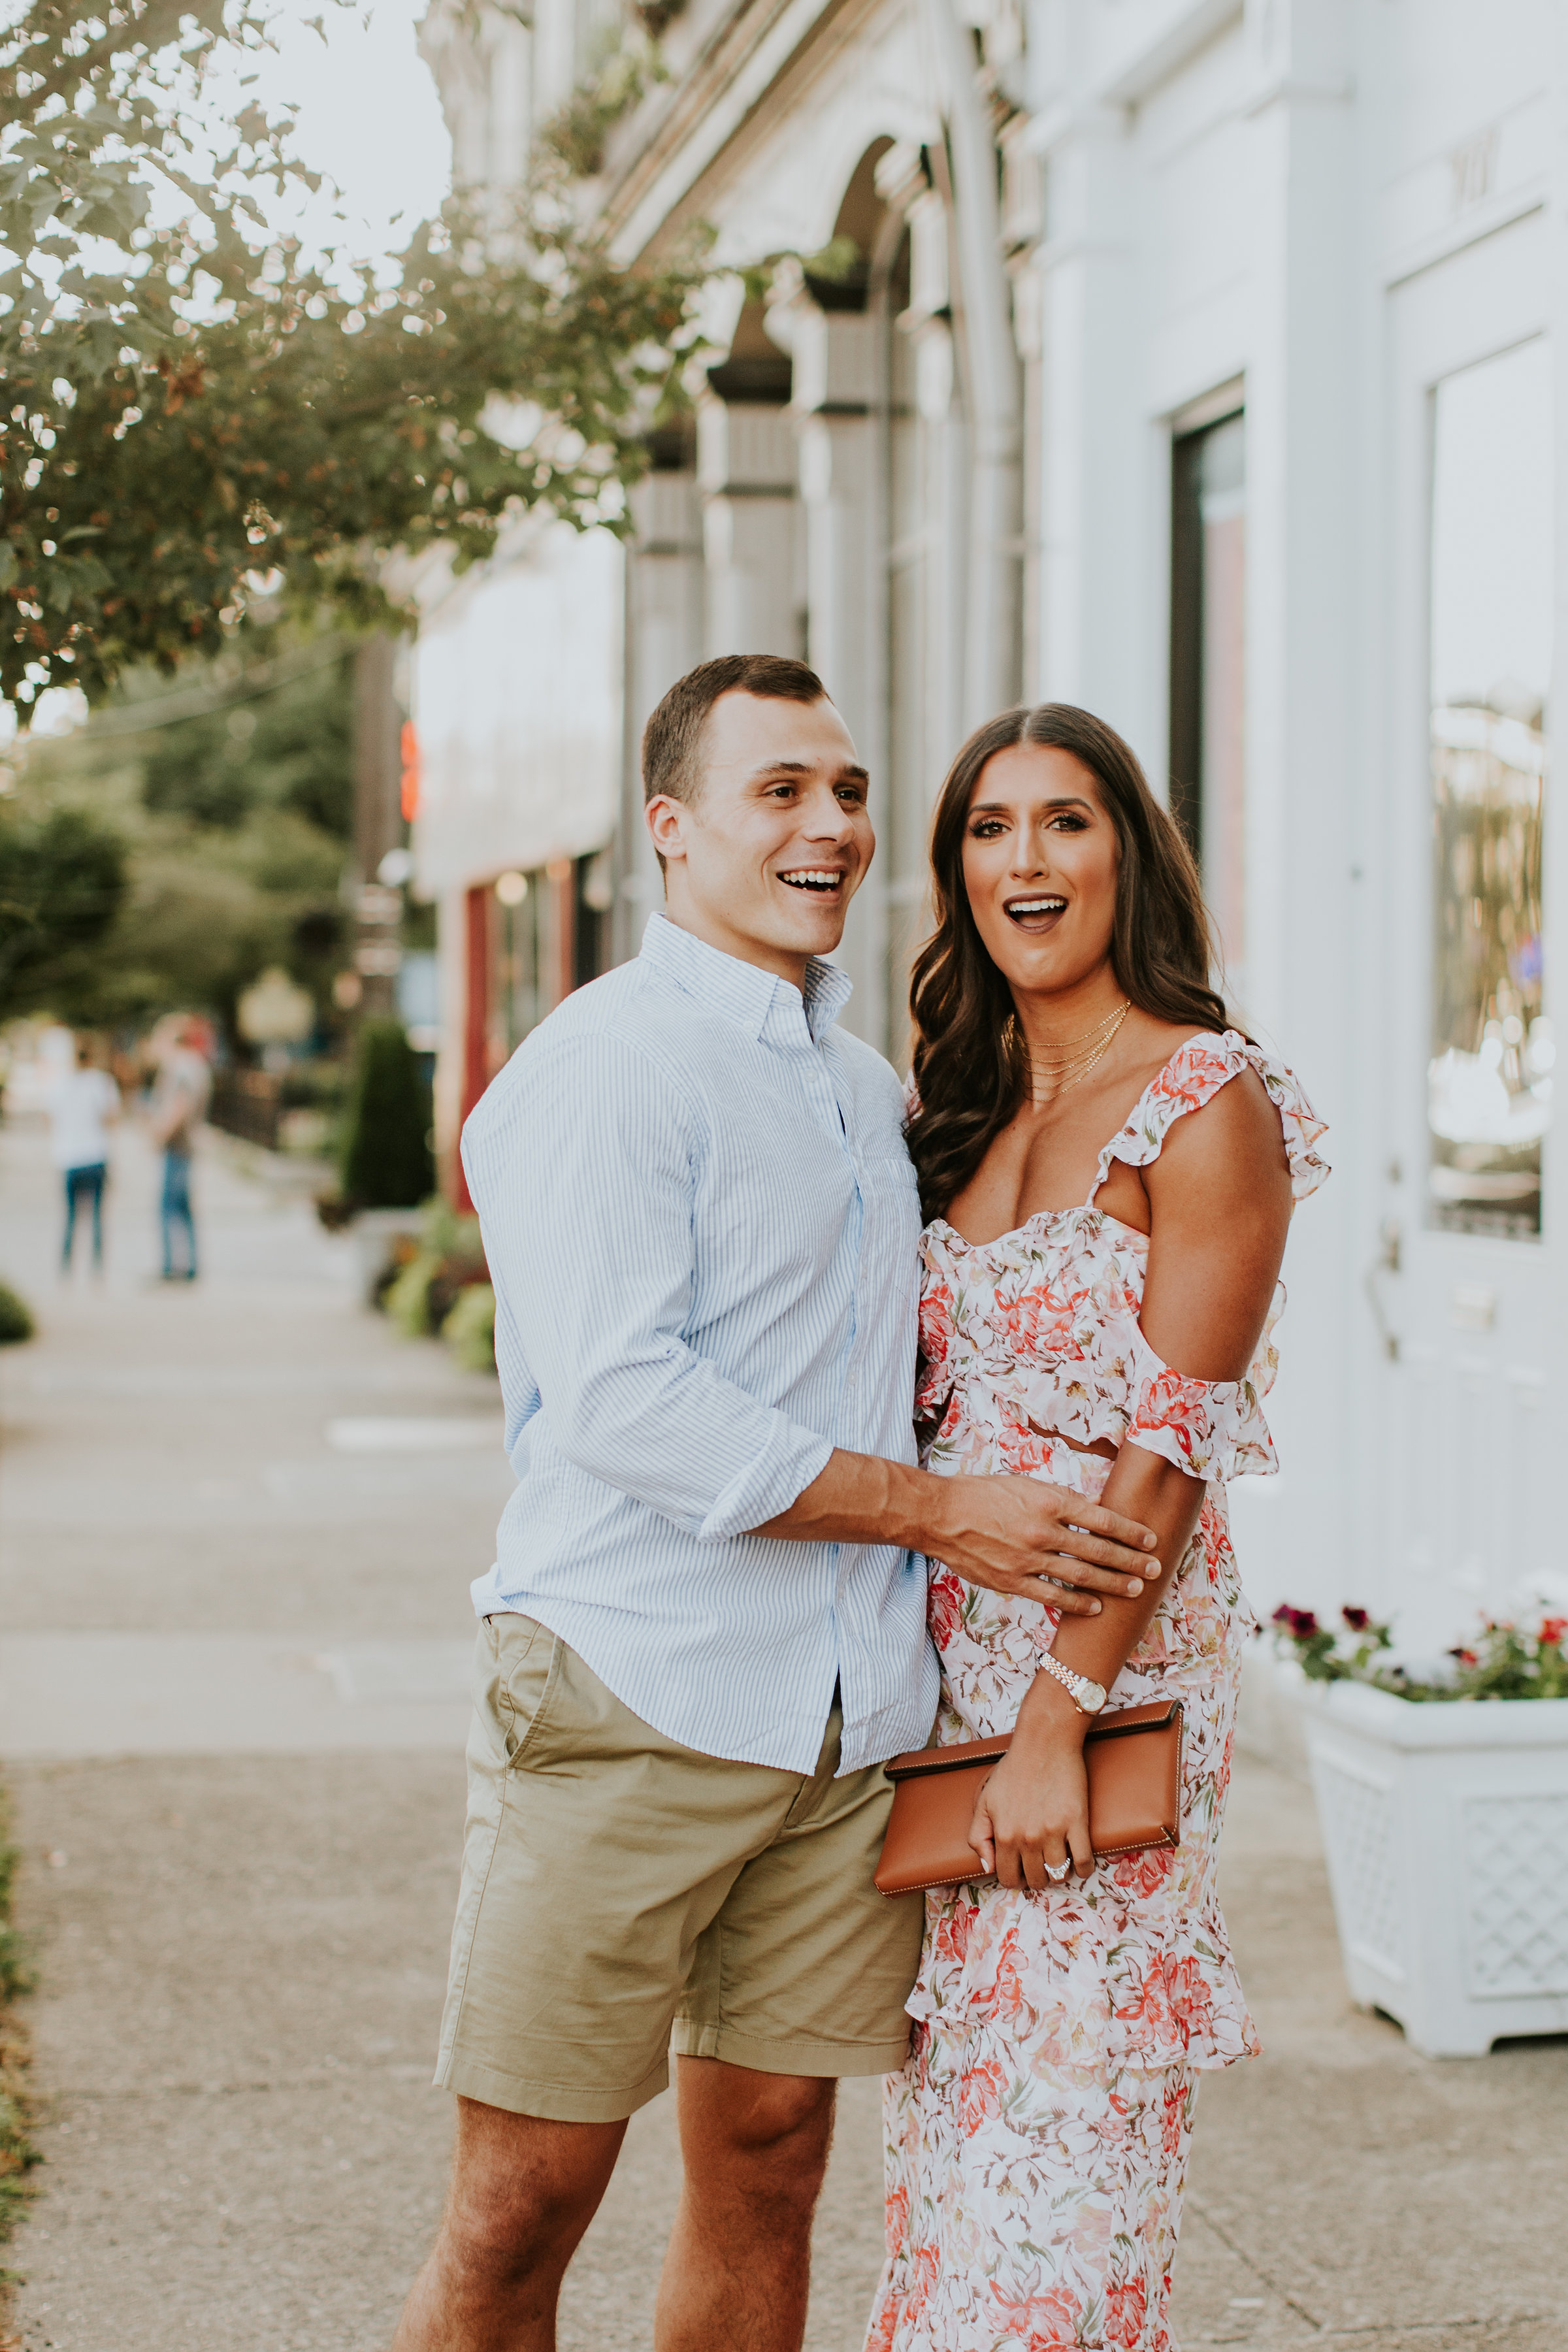 ruffle maxi dress, a southern drawl wedding, a southern drawl engagement, cold shoulder maxi dress, couples style, couples fashion, couples goals, jordan white a southern drawl, grace wainwright, grace white a southern drawl, tory burch miller clutch, date night outfit, cocktail dress, cocktail maxi dress, wedding guest dress // a southern drawl